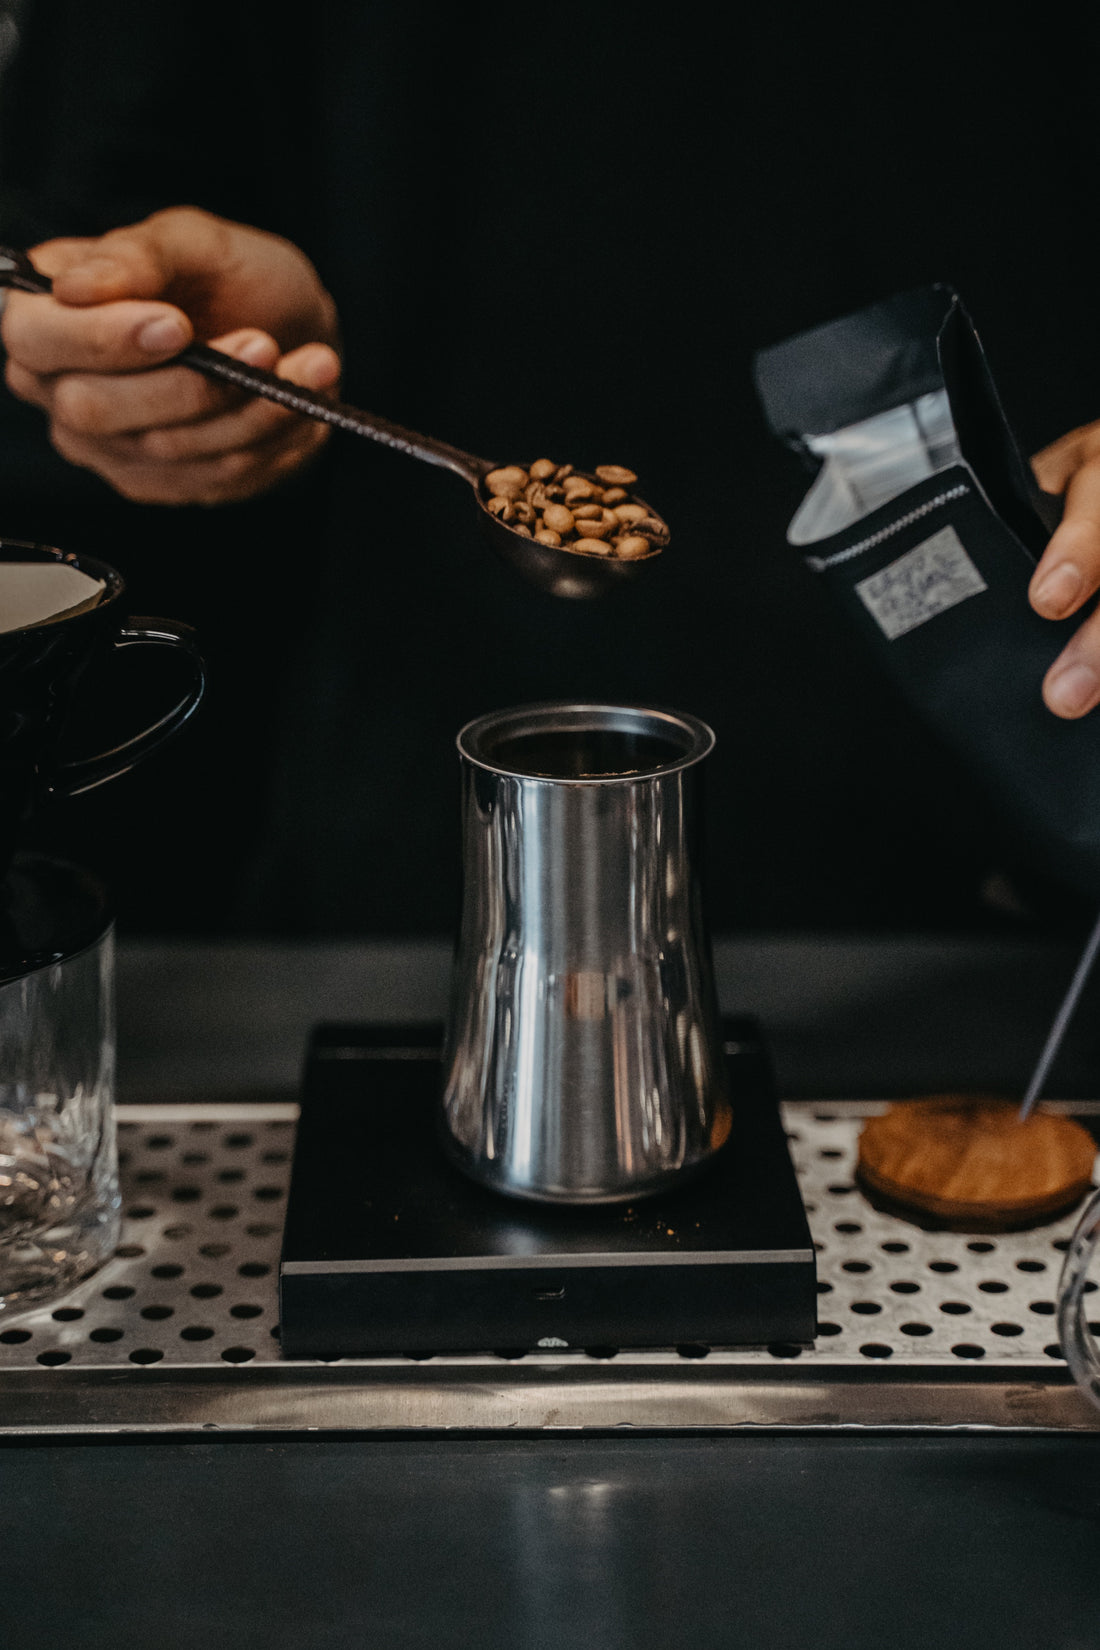 How to Make the Perfect Cup of "The Drip" Coffee at Home